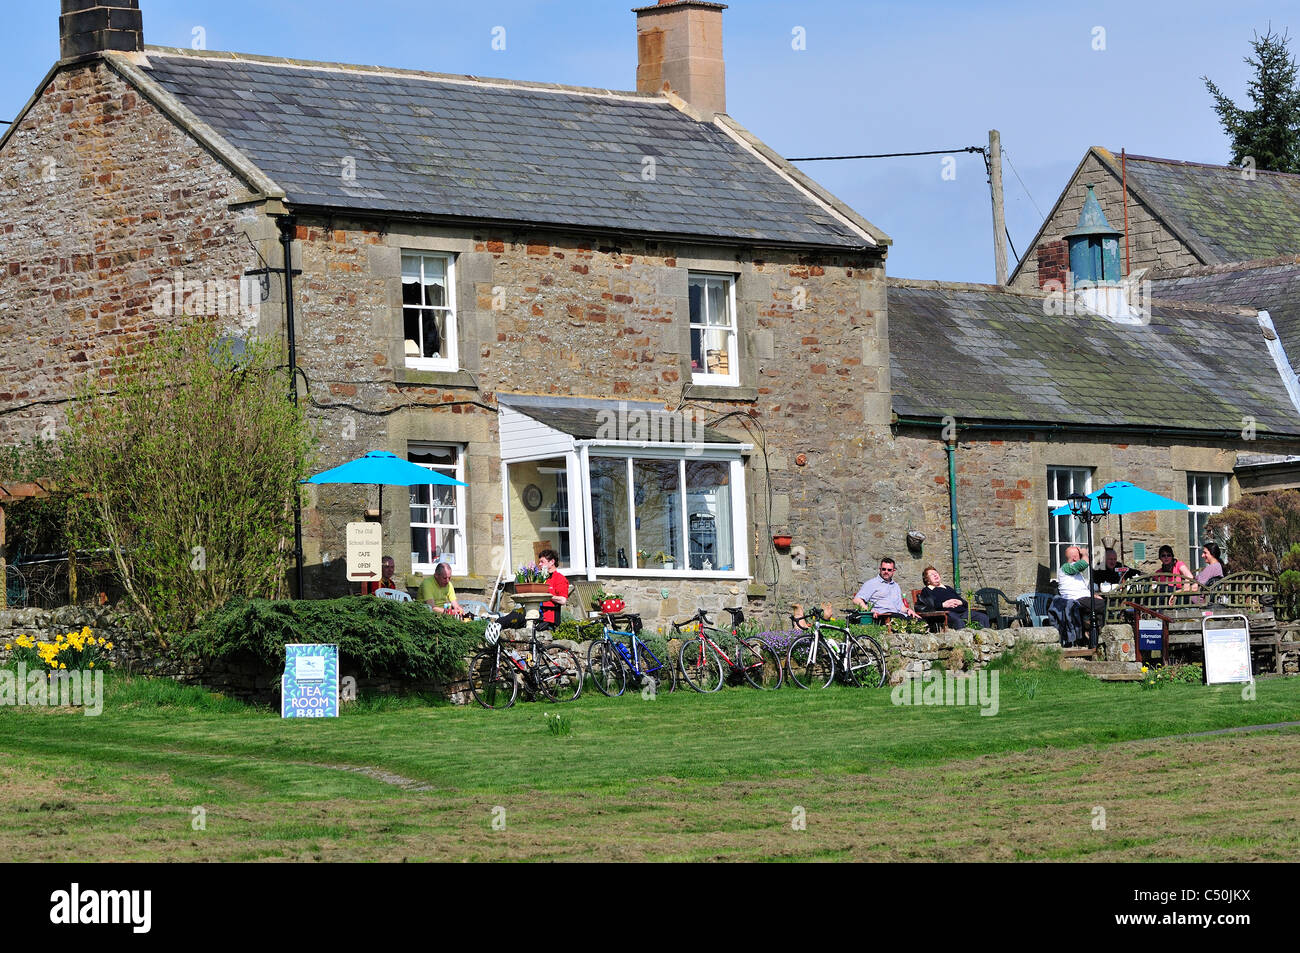 Cyclists and walkers tea shop on village green east of and near Rothbury, Northumberland, UK Stock Photo